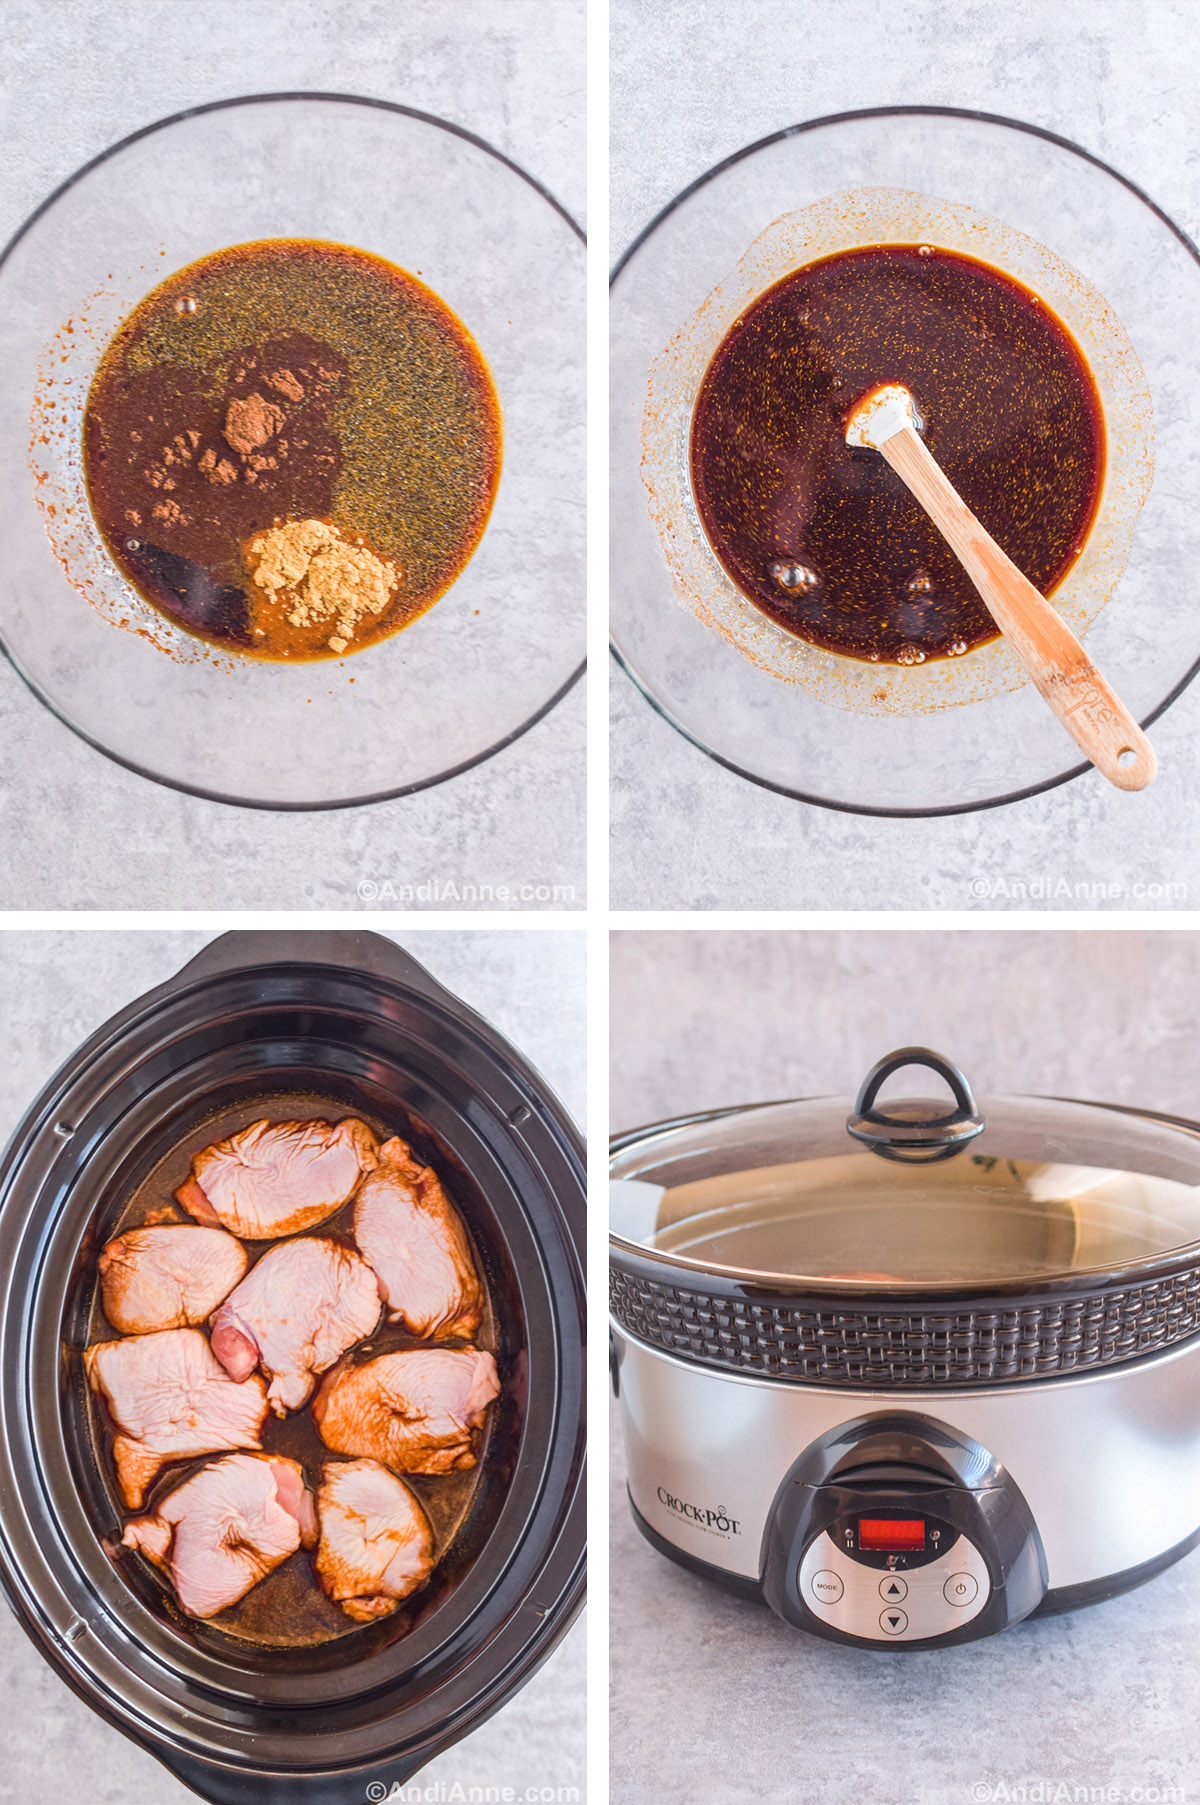 Four images showing steps to make recipe including glass bowl with dark liquids and various spices dumped in. A glass bowls with dark brown sauce and a spatula, Looking down at a crockpot with raw chicken in sauce, and a crockpot sitting on the counter.